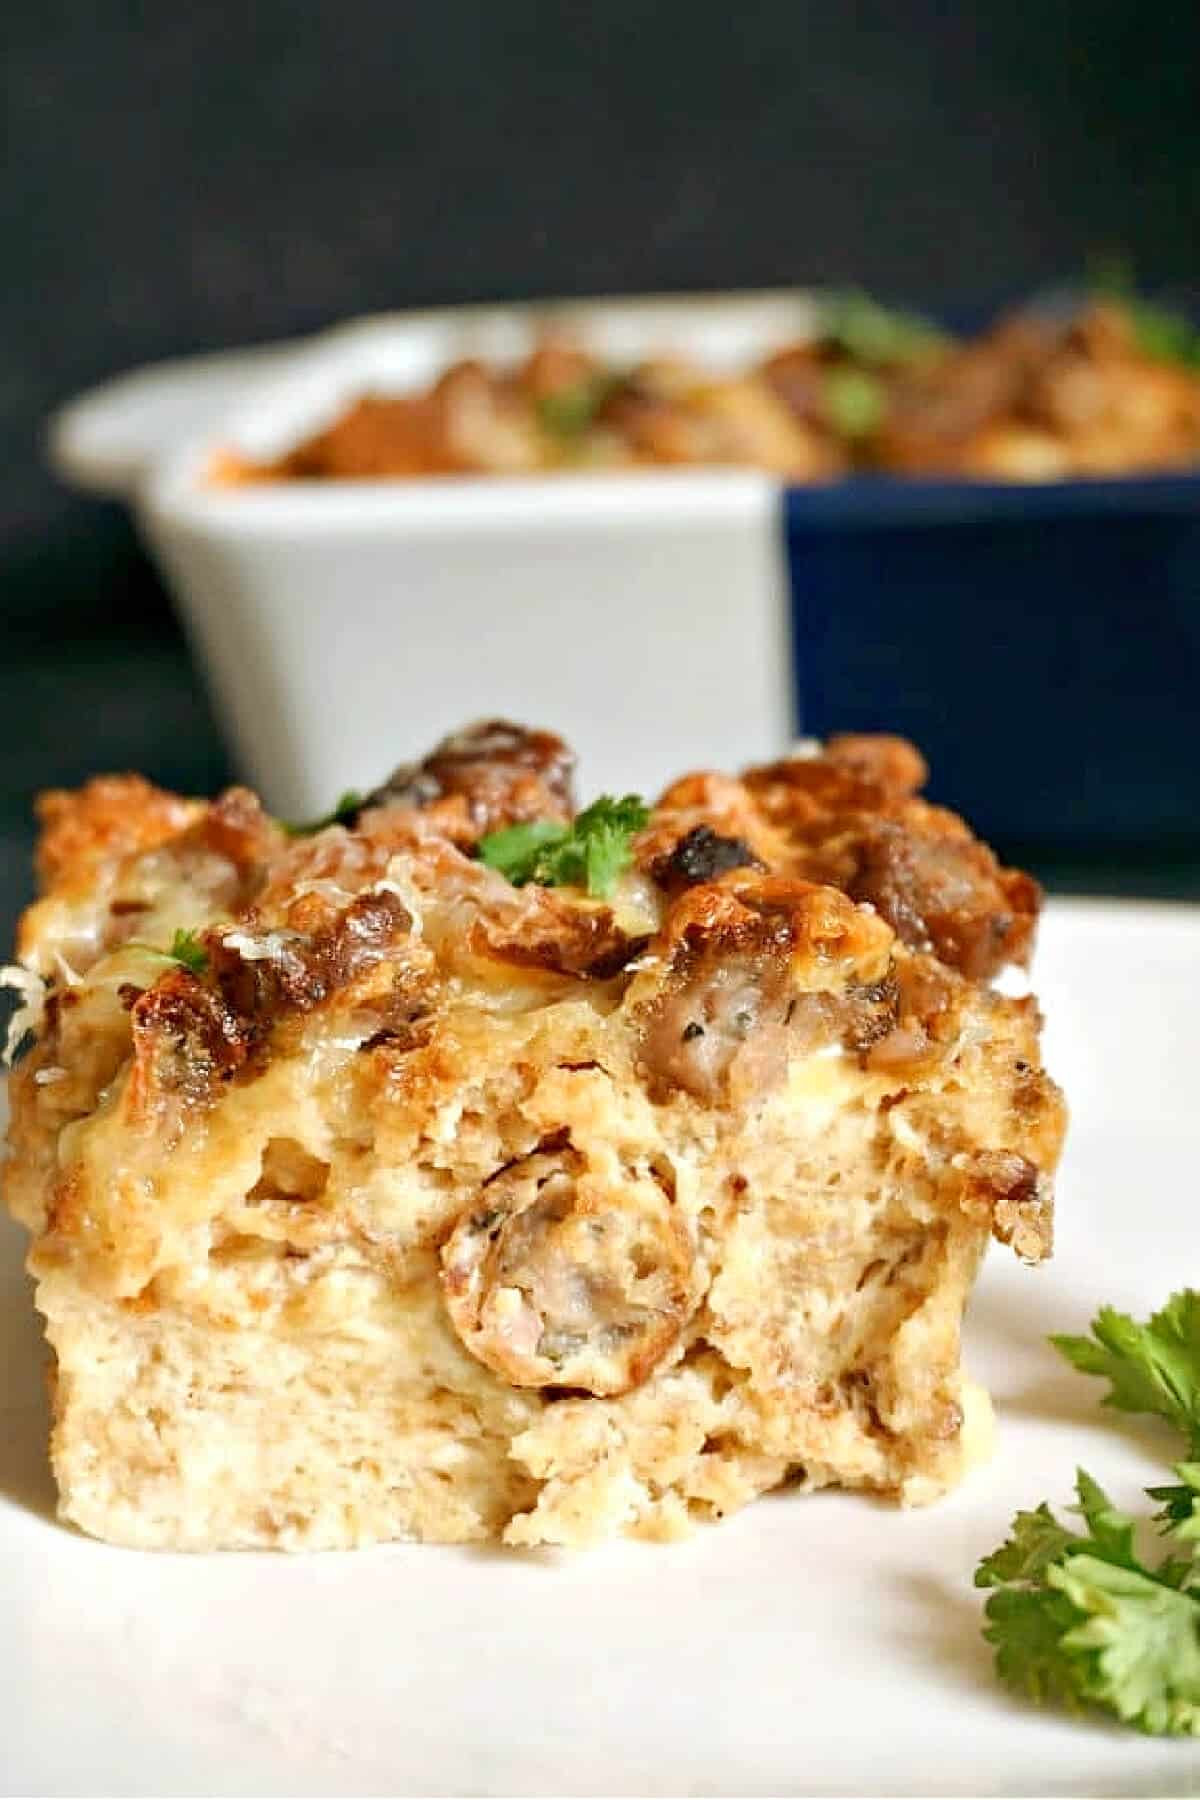 A slice of sausage and egg casserole